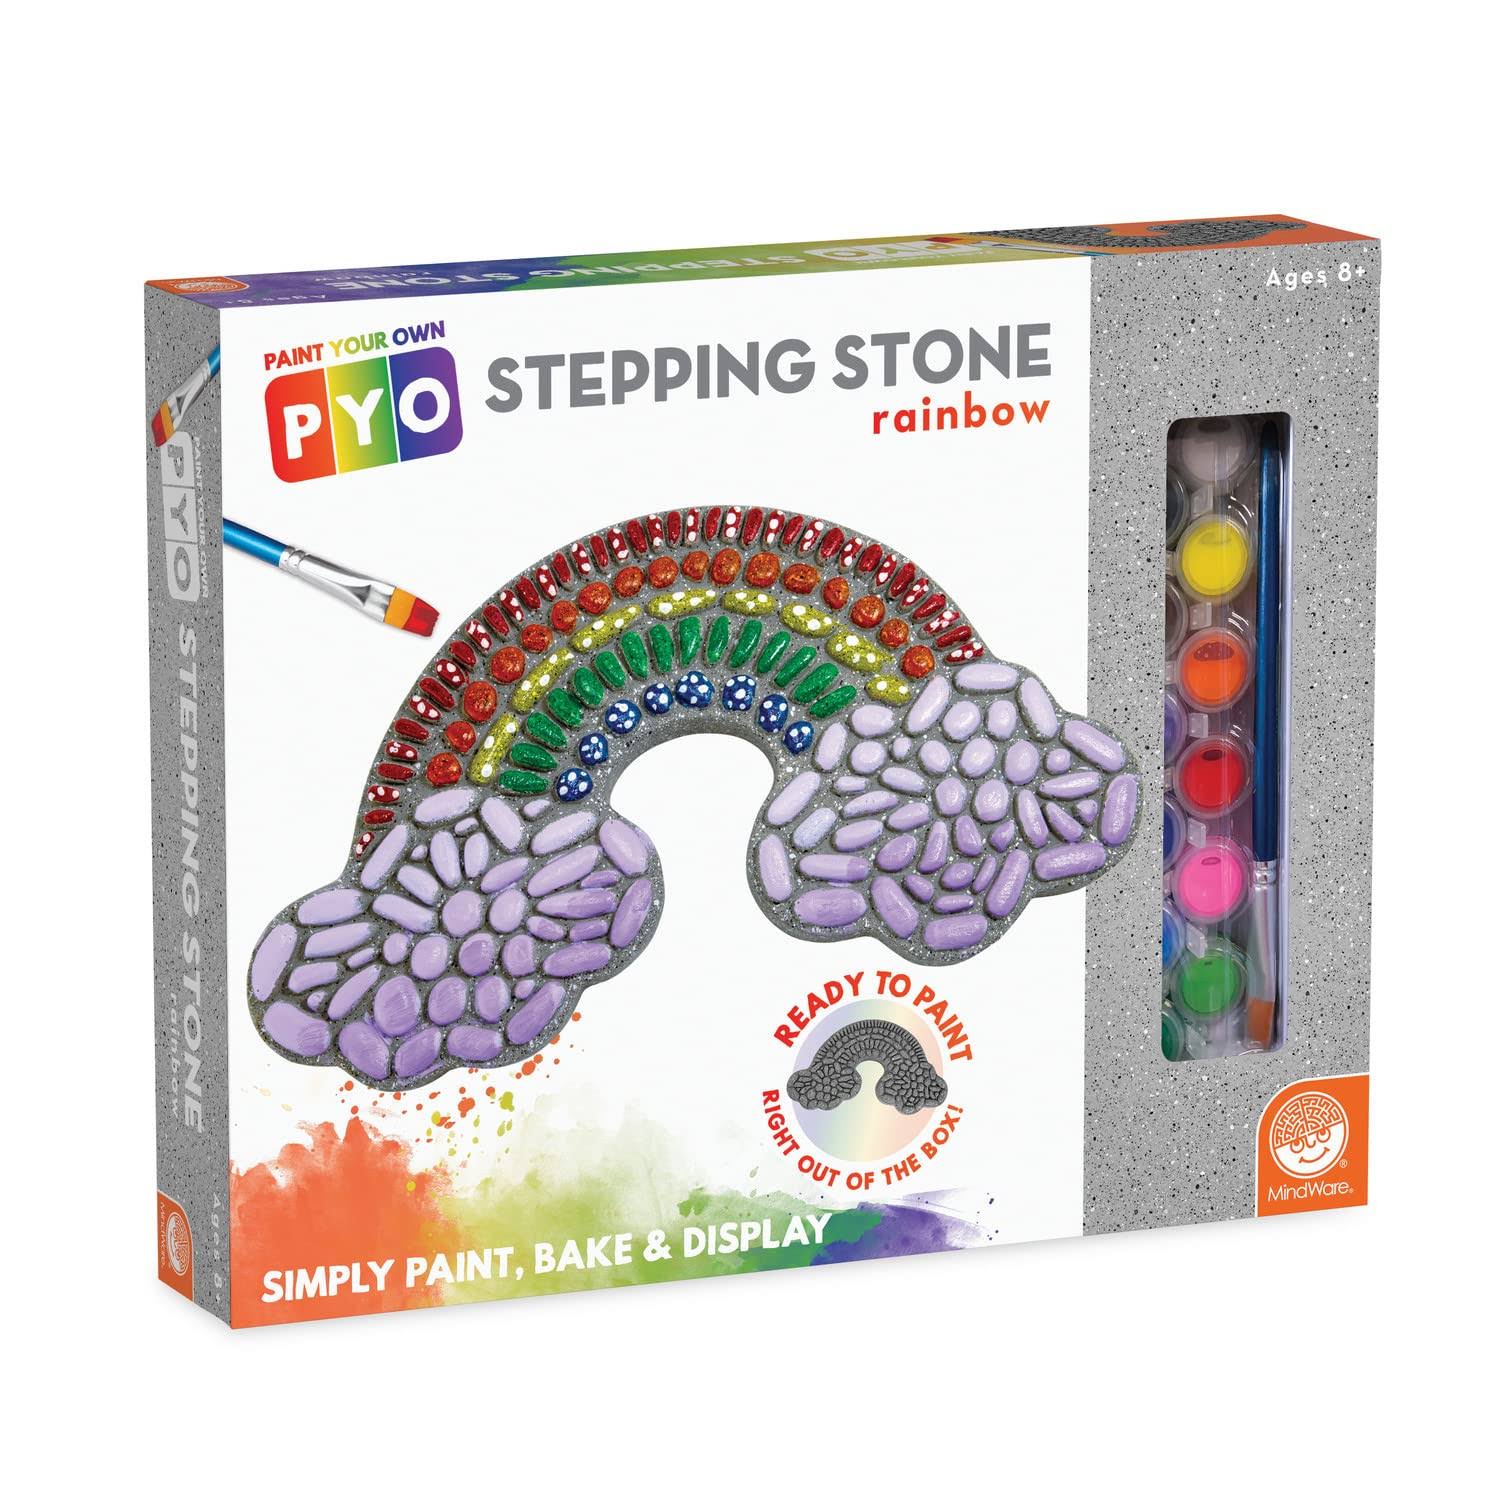 MindWare Paint Your Own Stepping Stone Rainbow